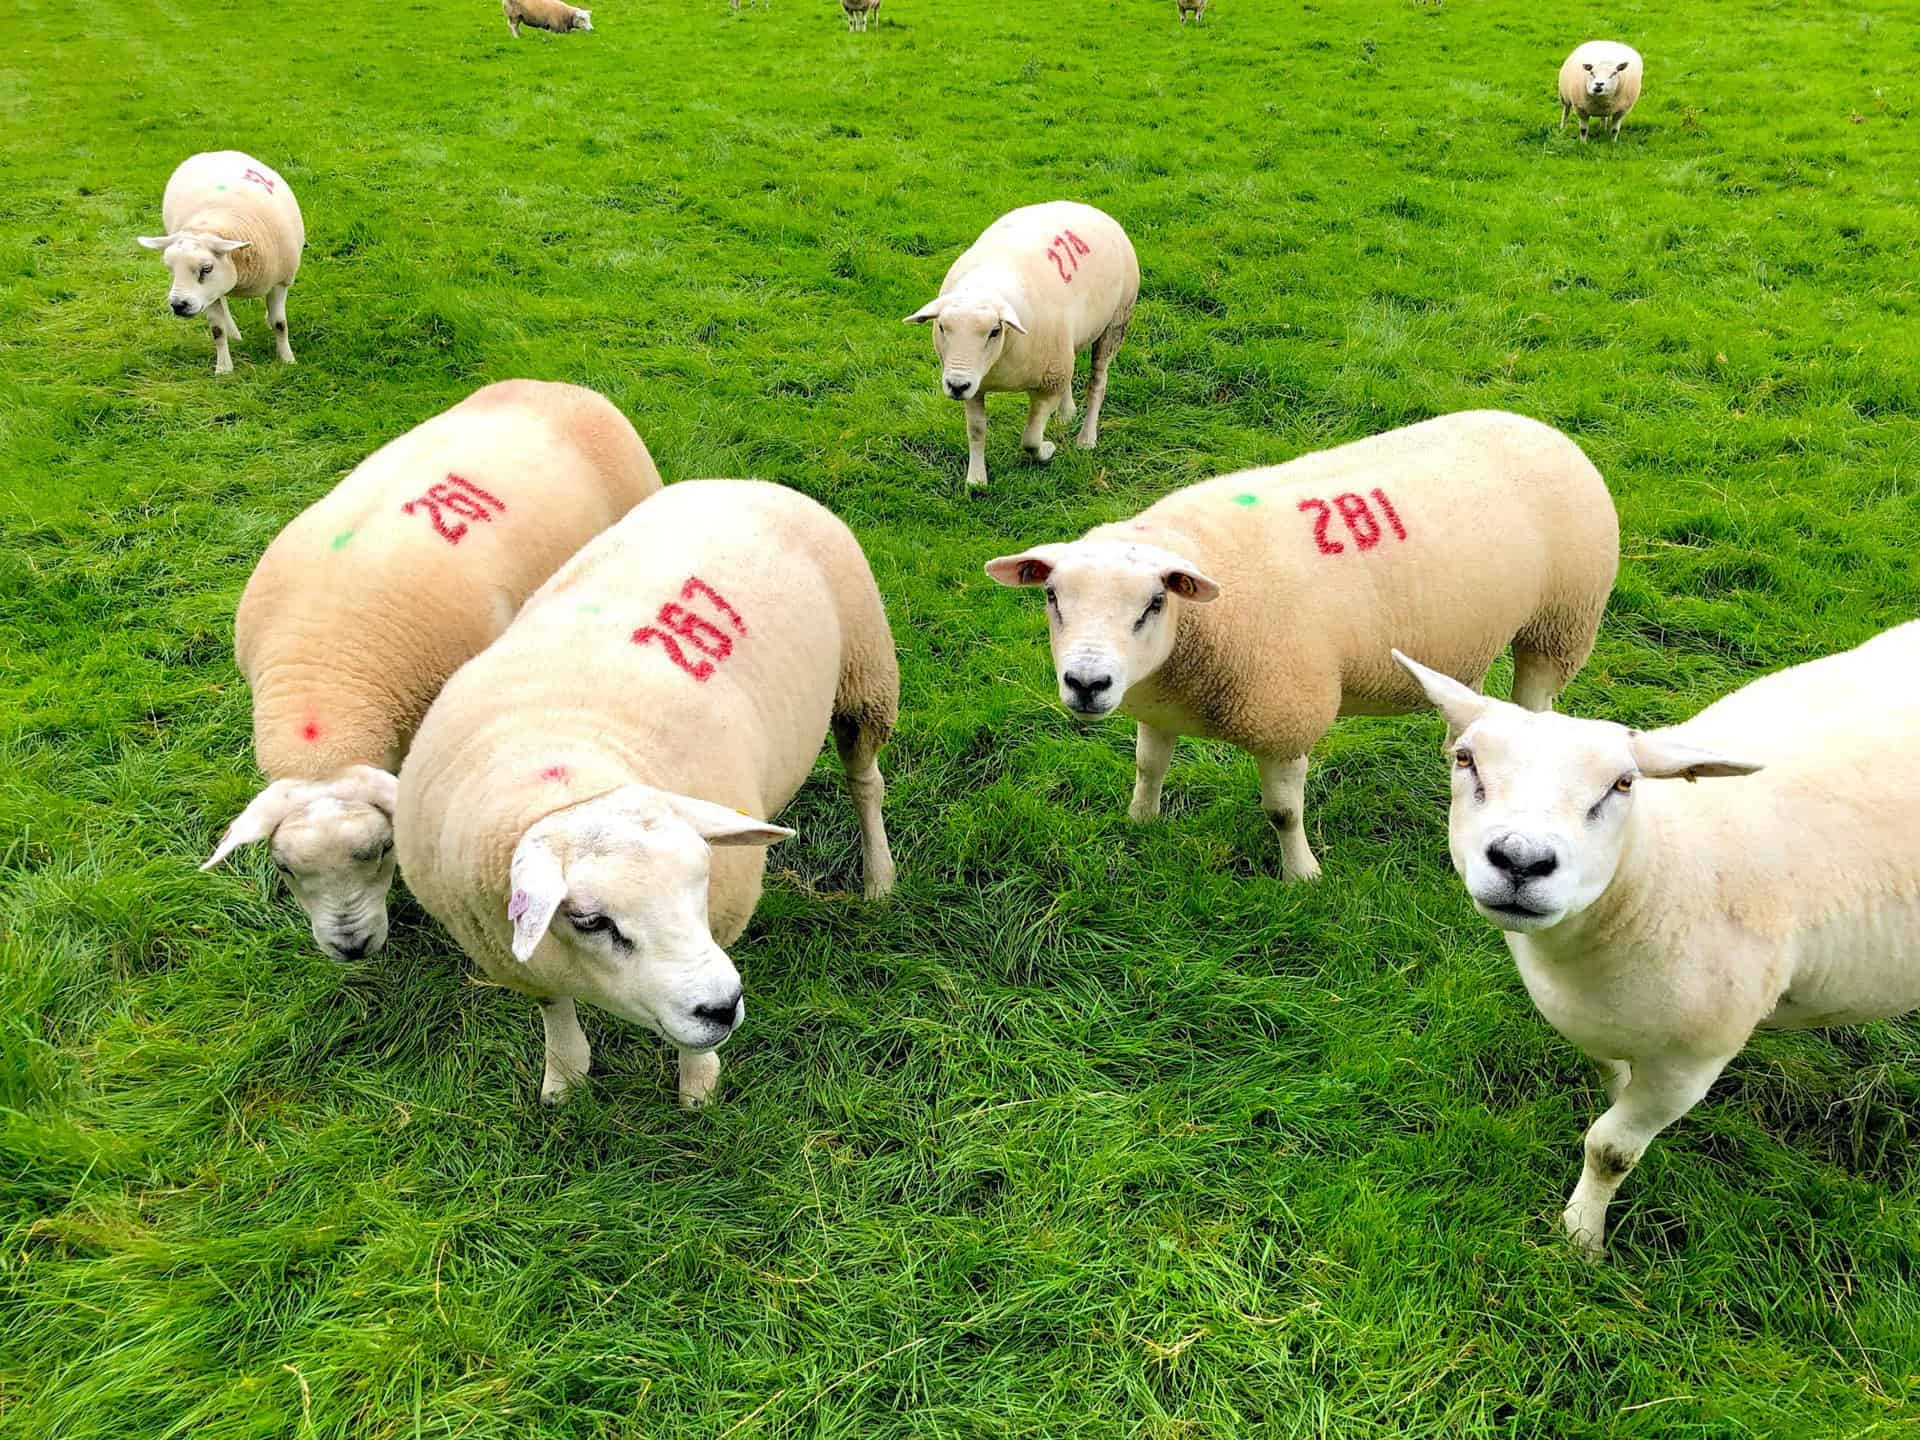 Friendly sheep greeting visitors as they traverse their field on this Barnard Castle walk, each neatly numbered.